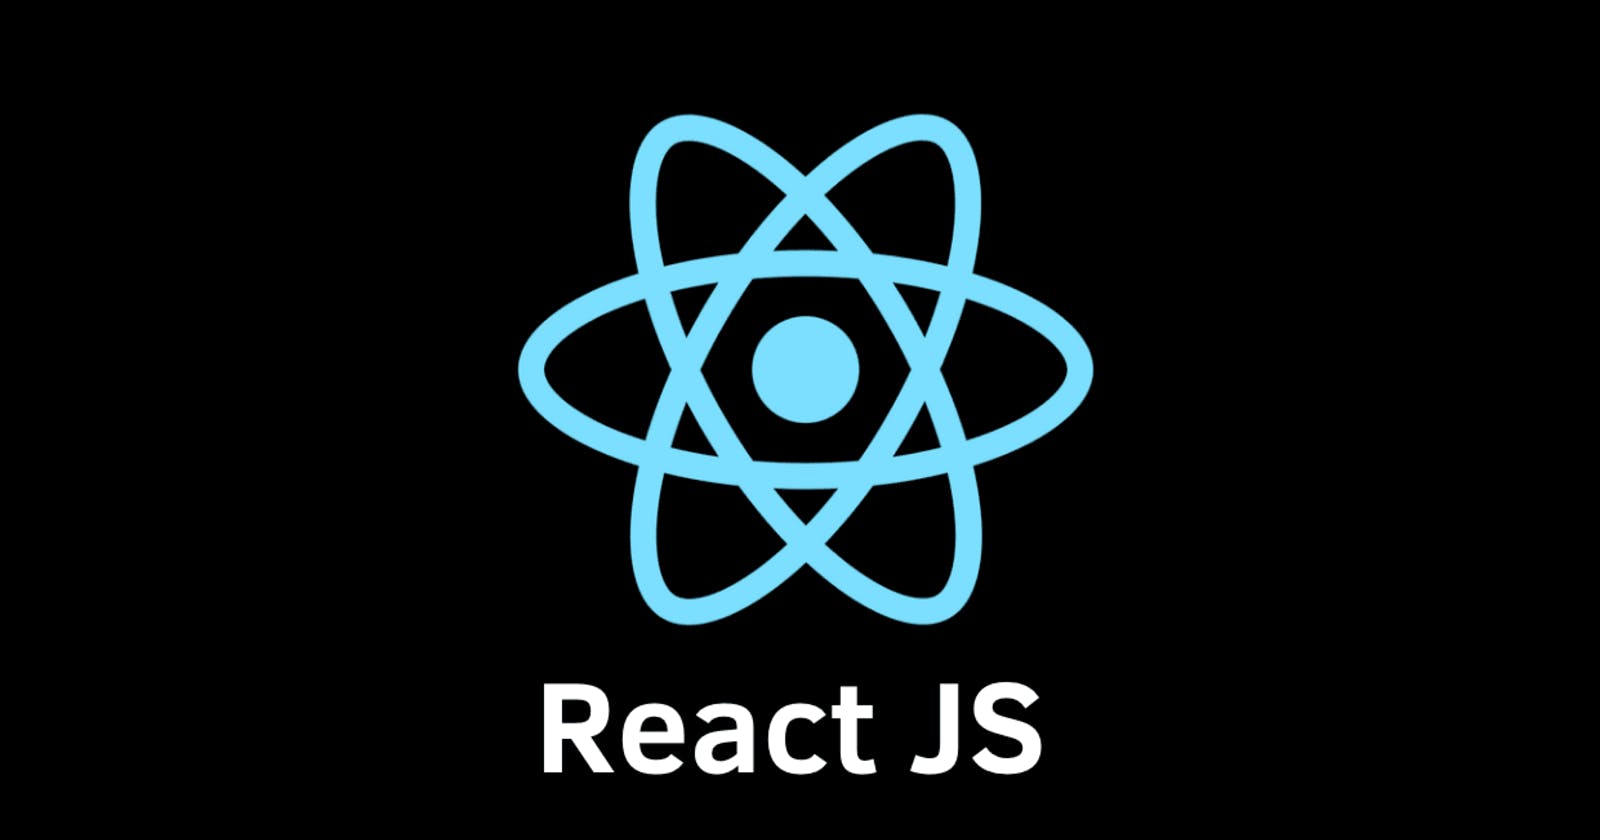 How to start working with React as a beginner